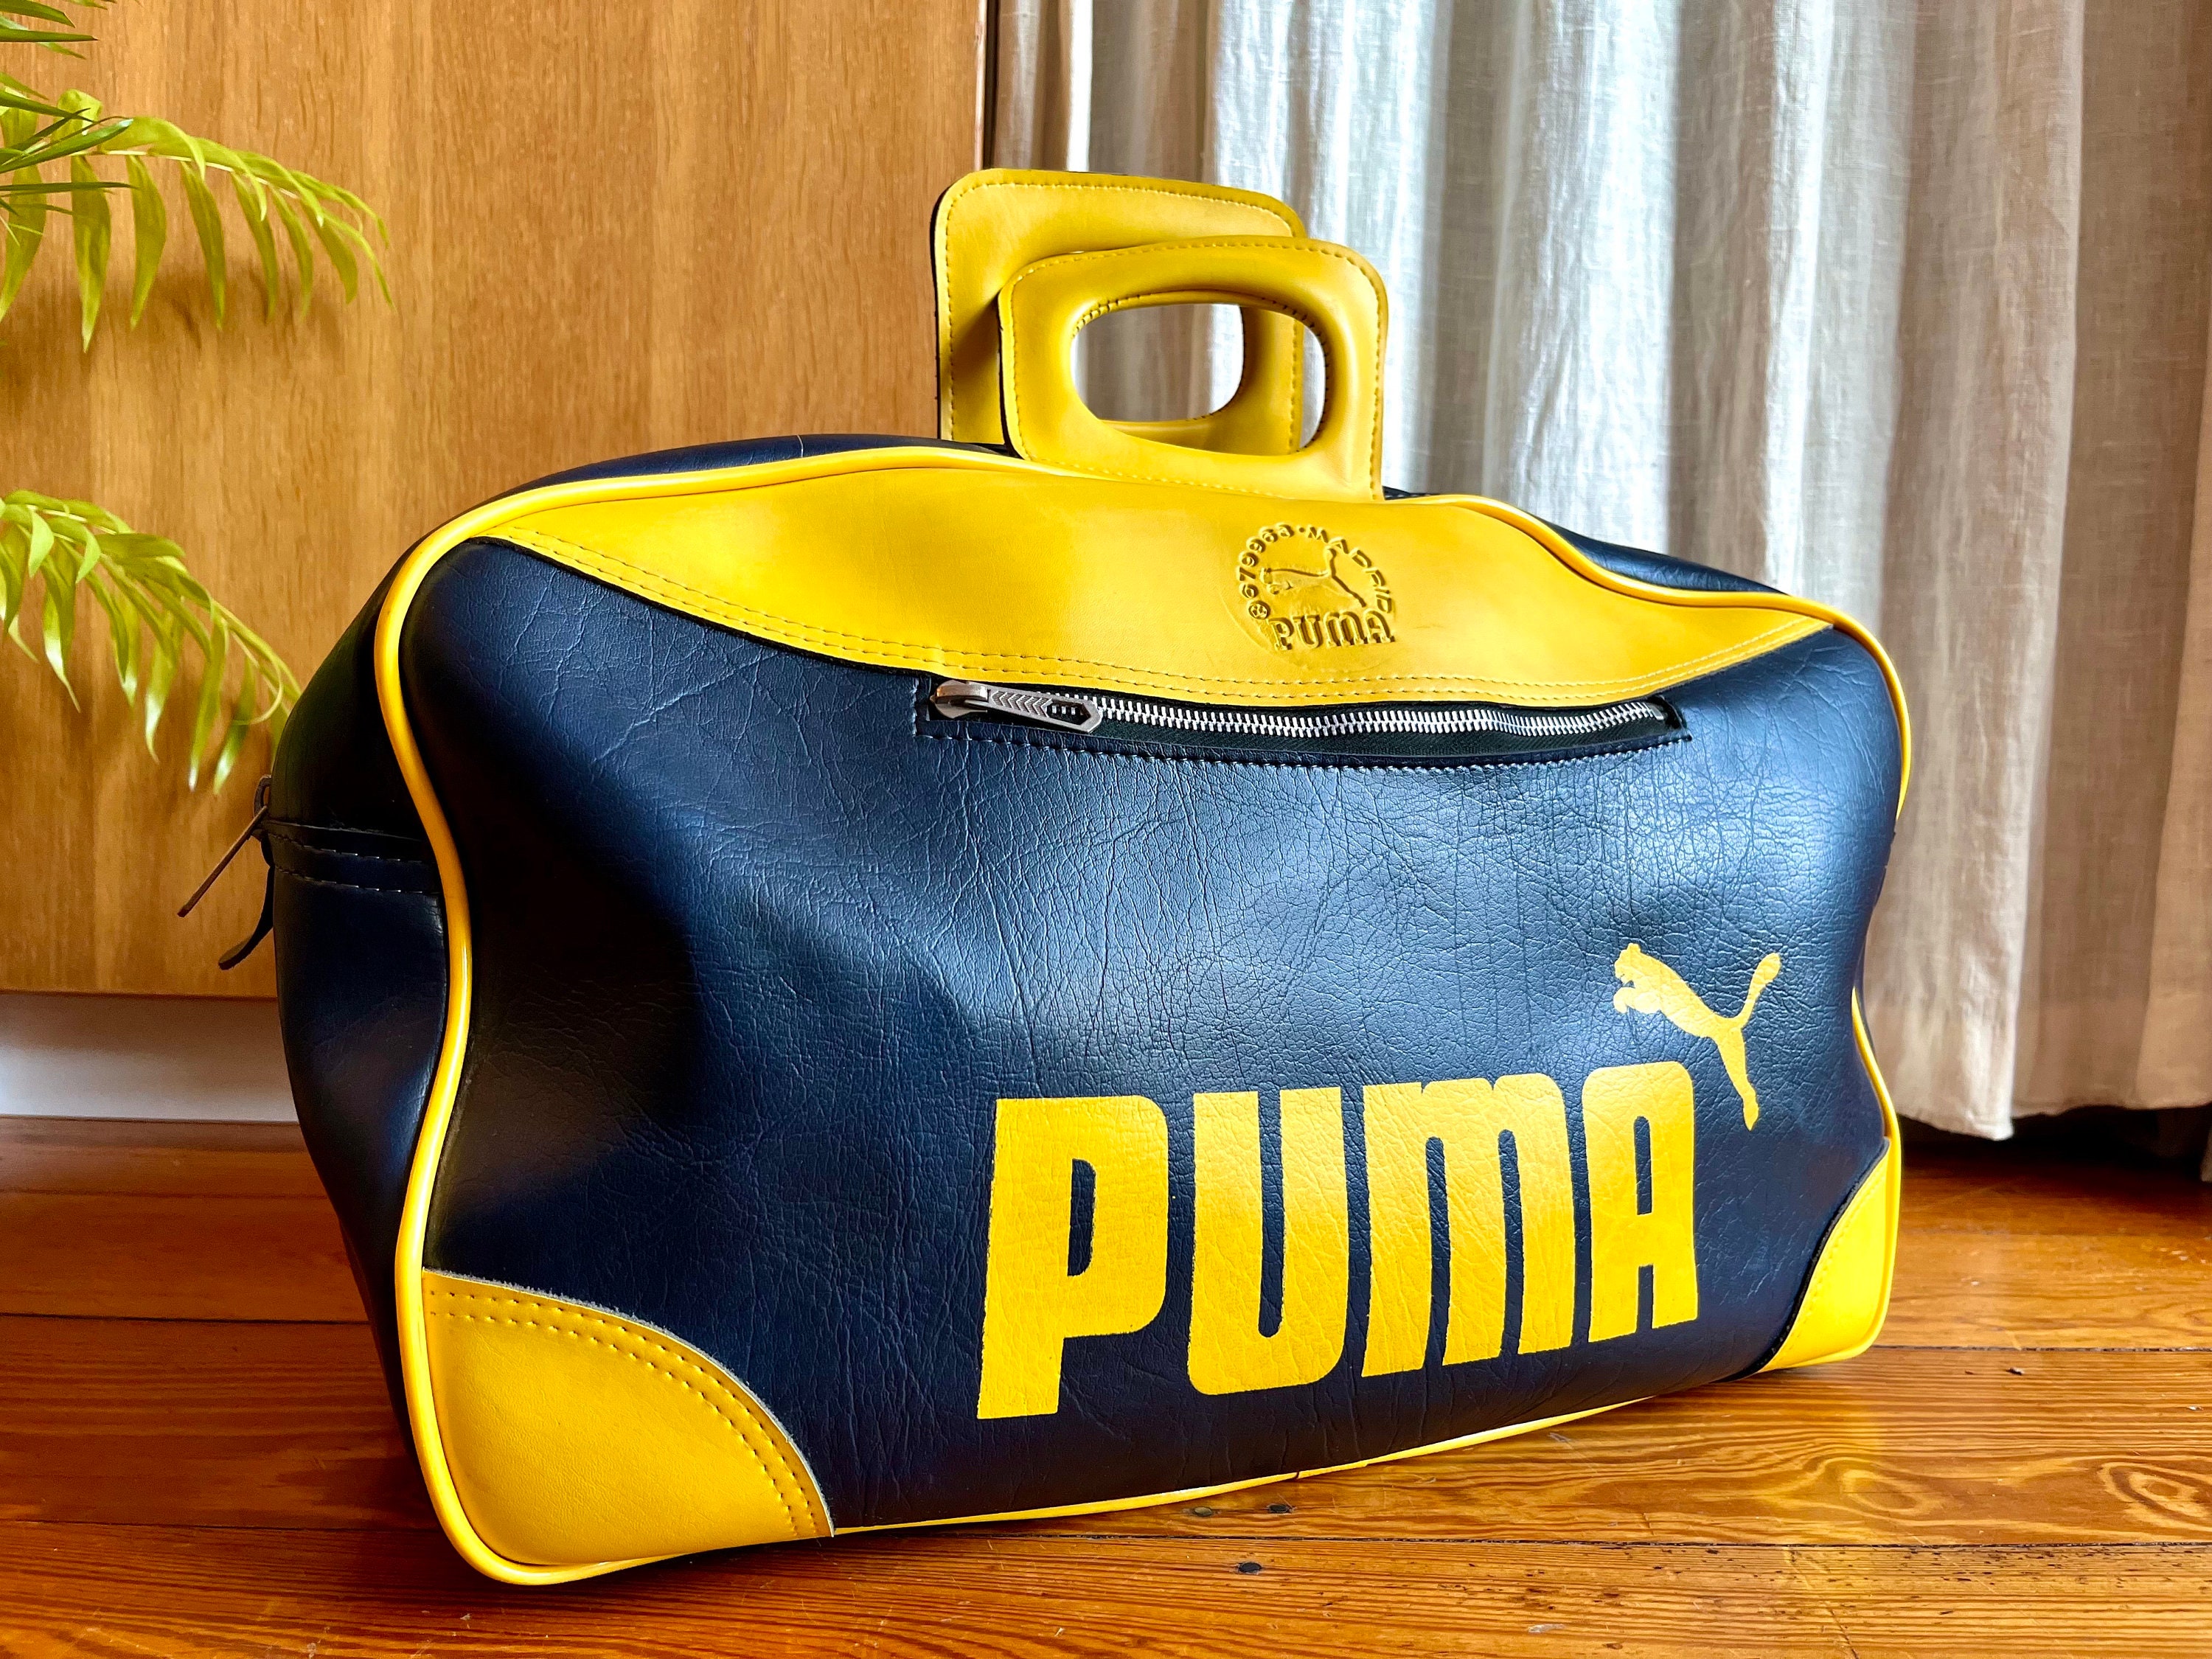 PUMA Blue Baig in Solan - Dealers, Manufacturers & Suppliers - Justdial